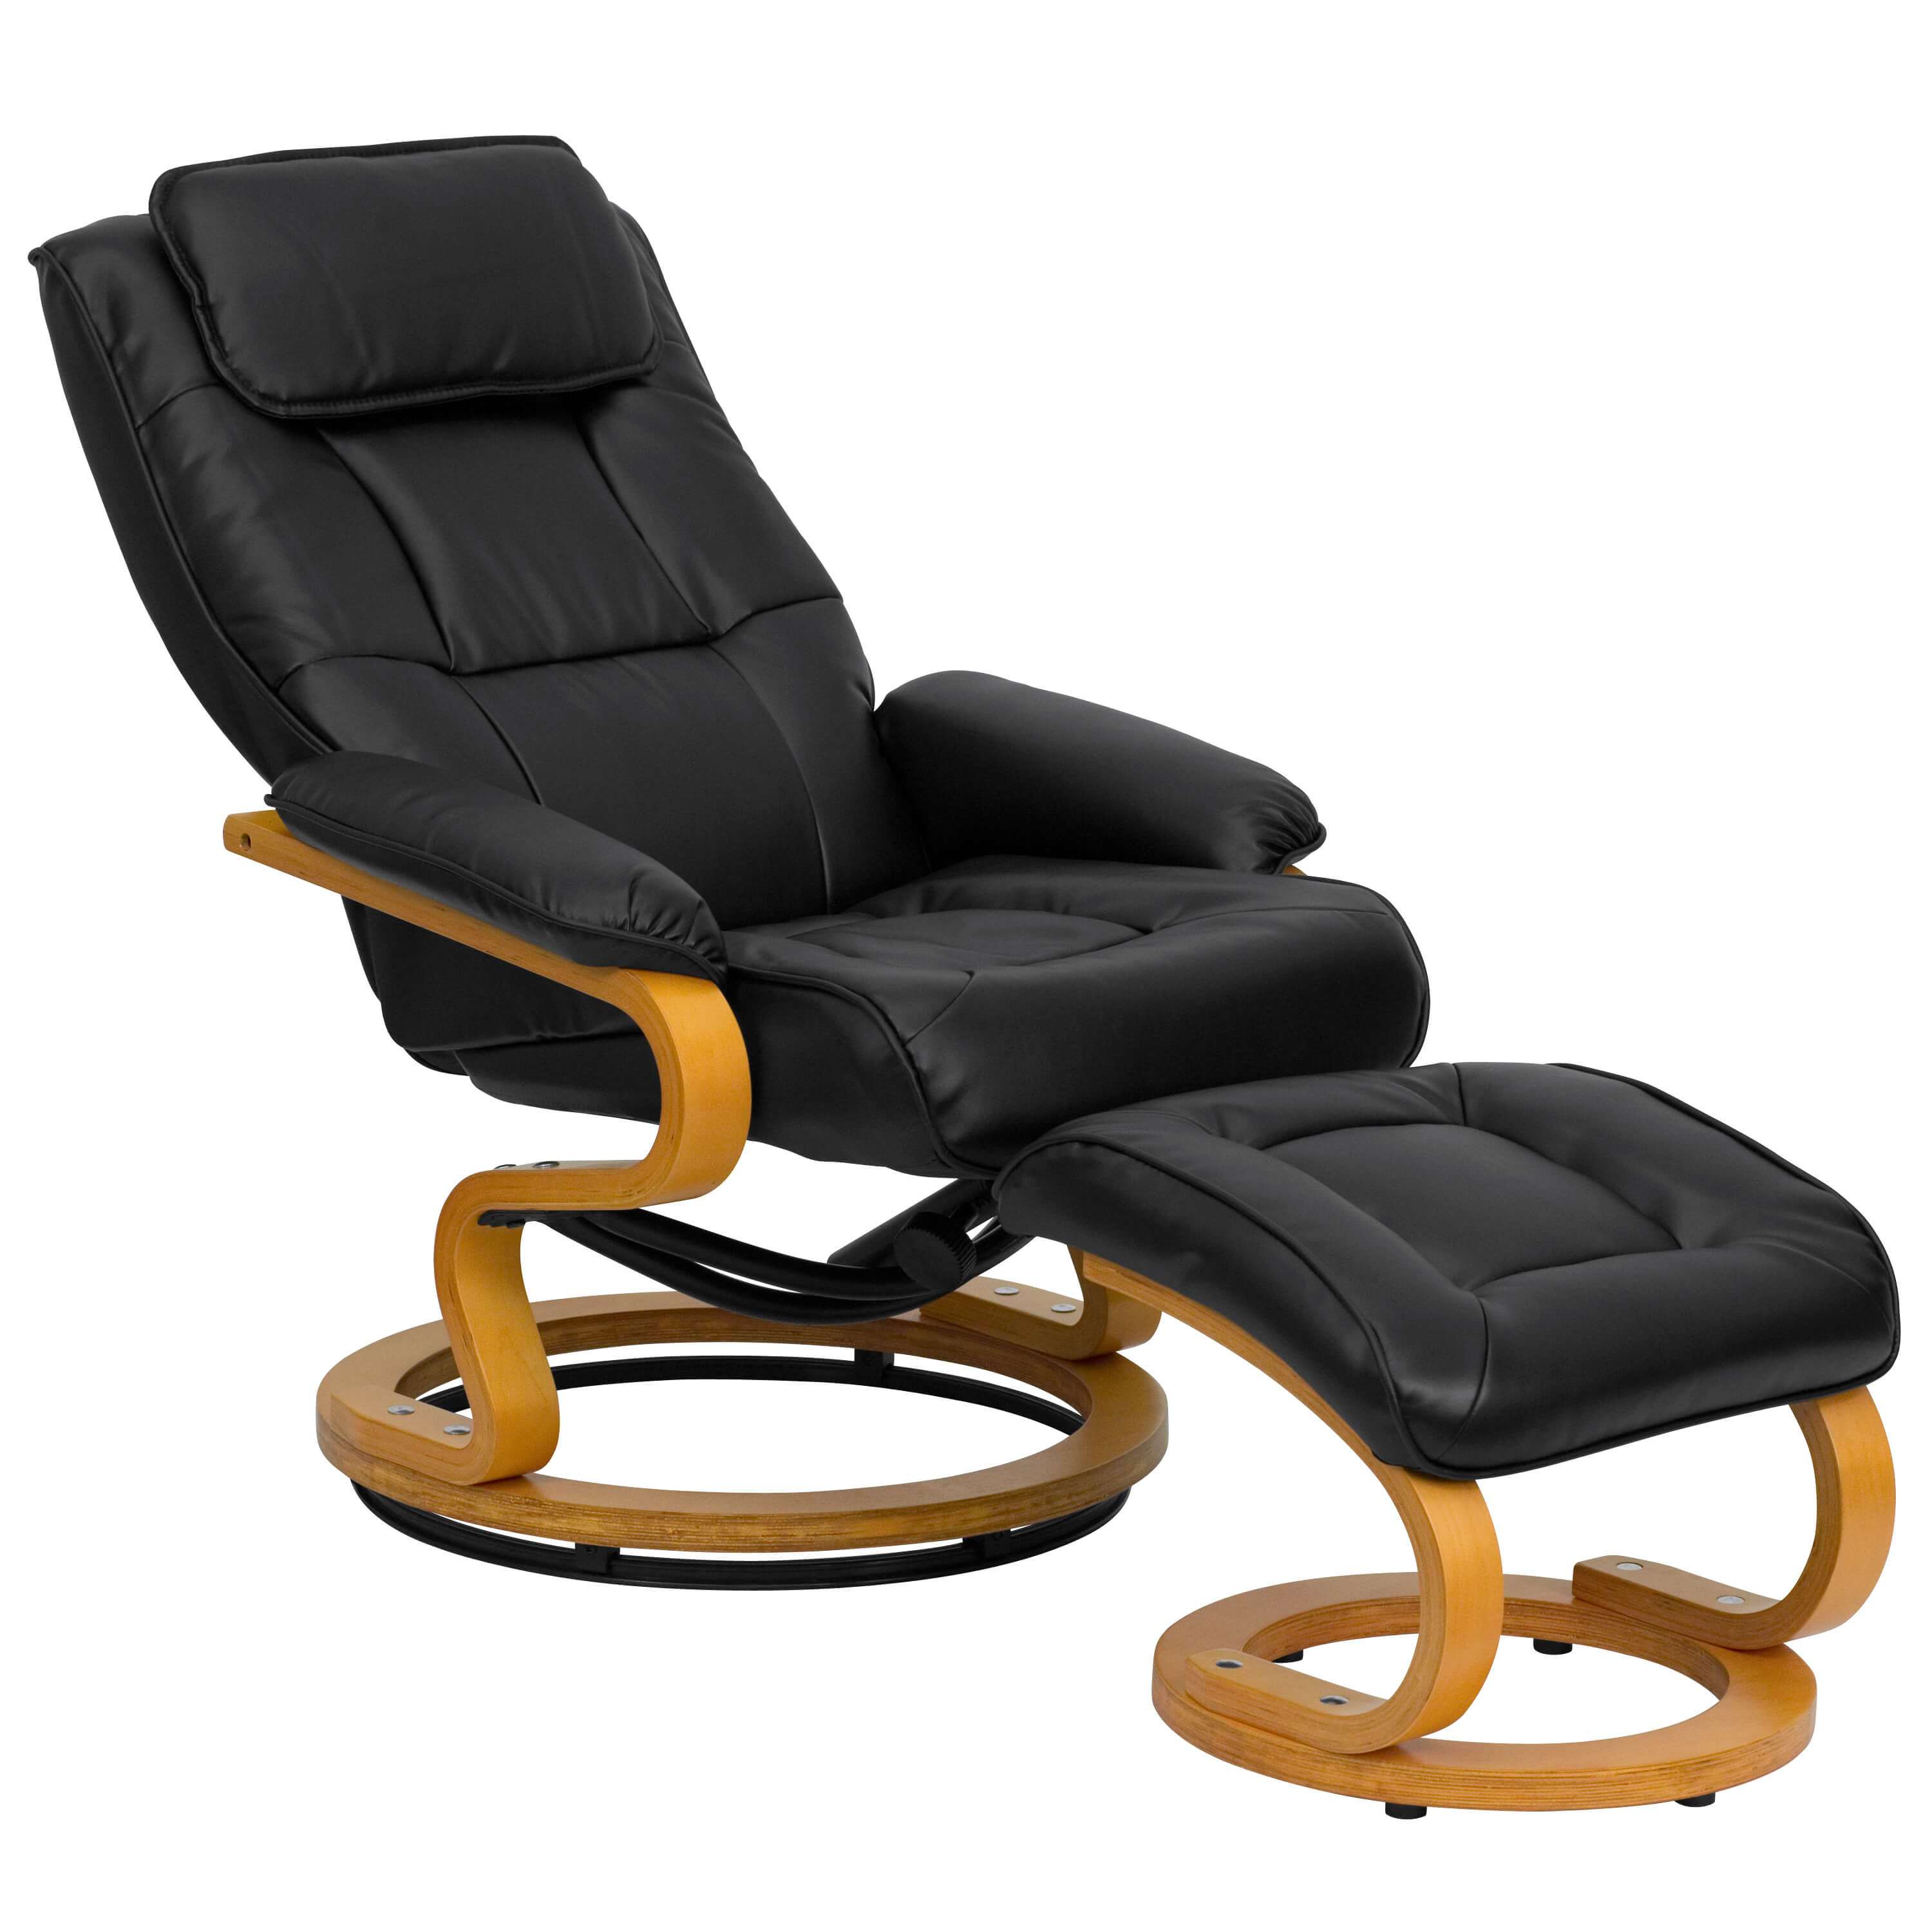 High back recliner chair reclined view